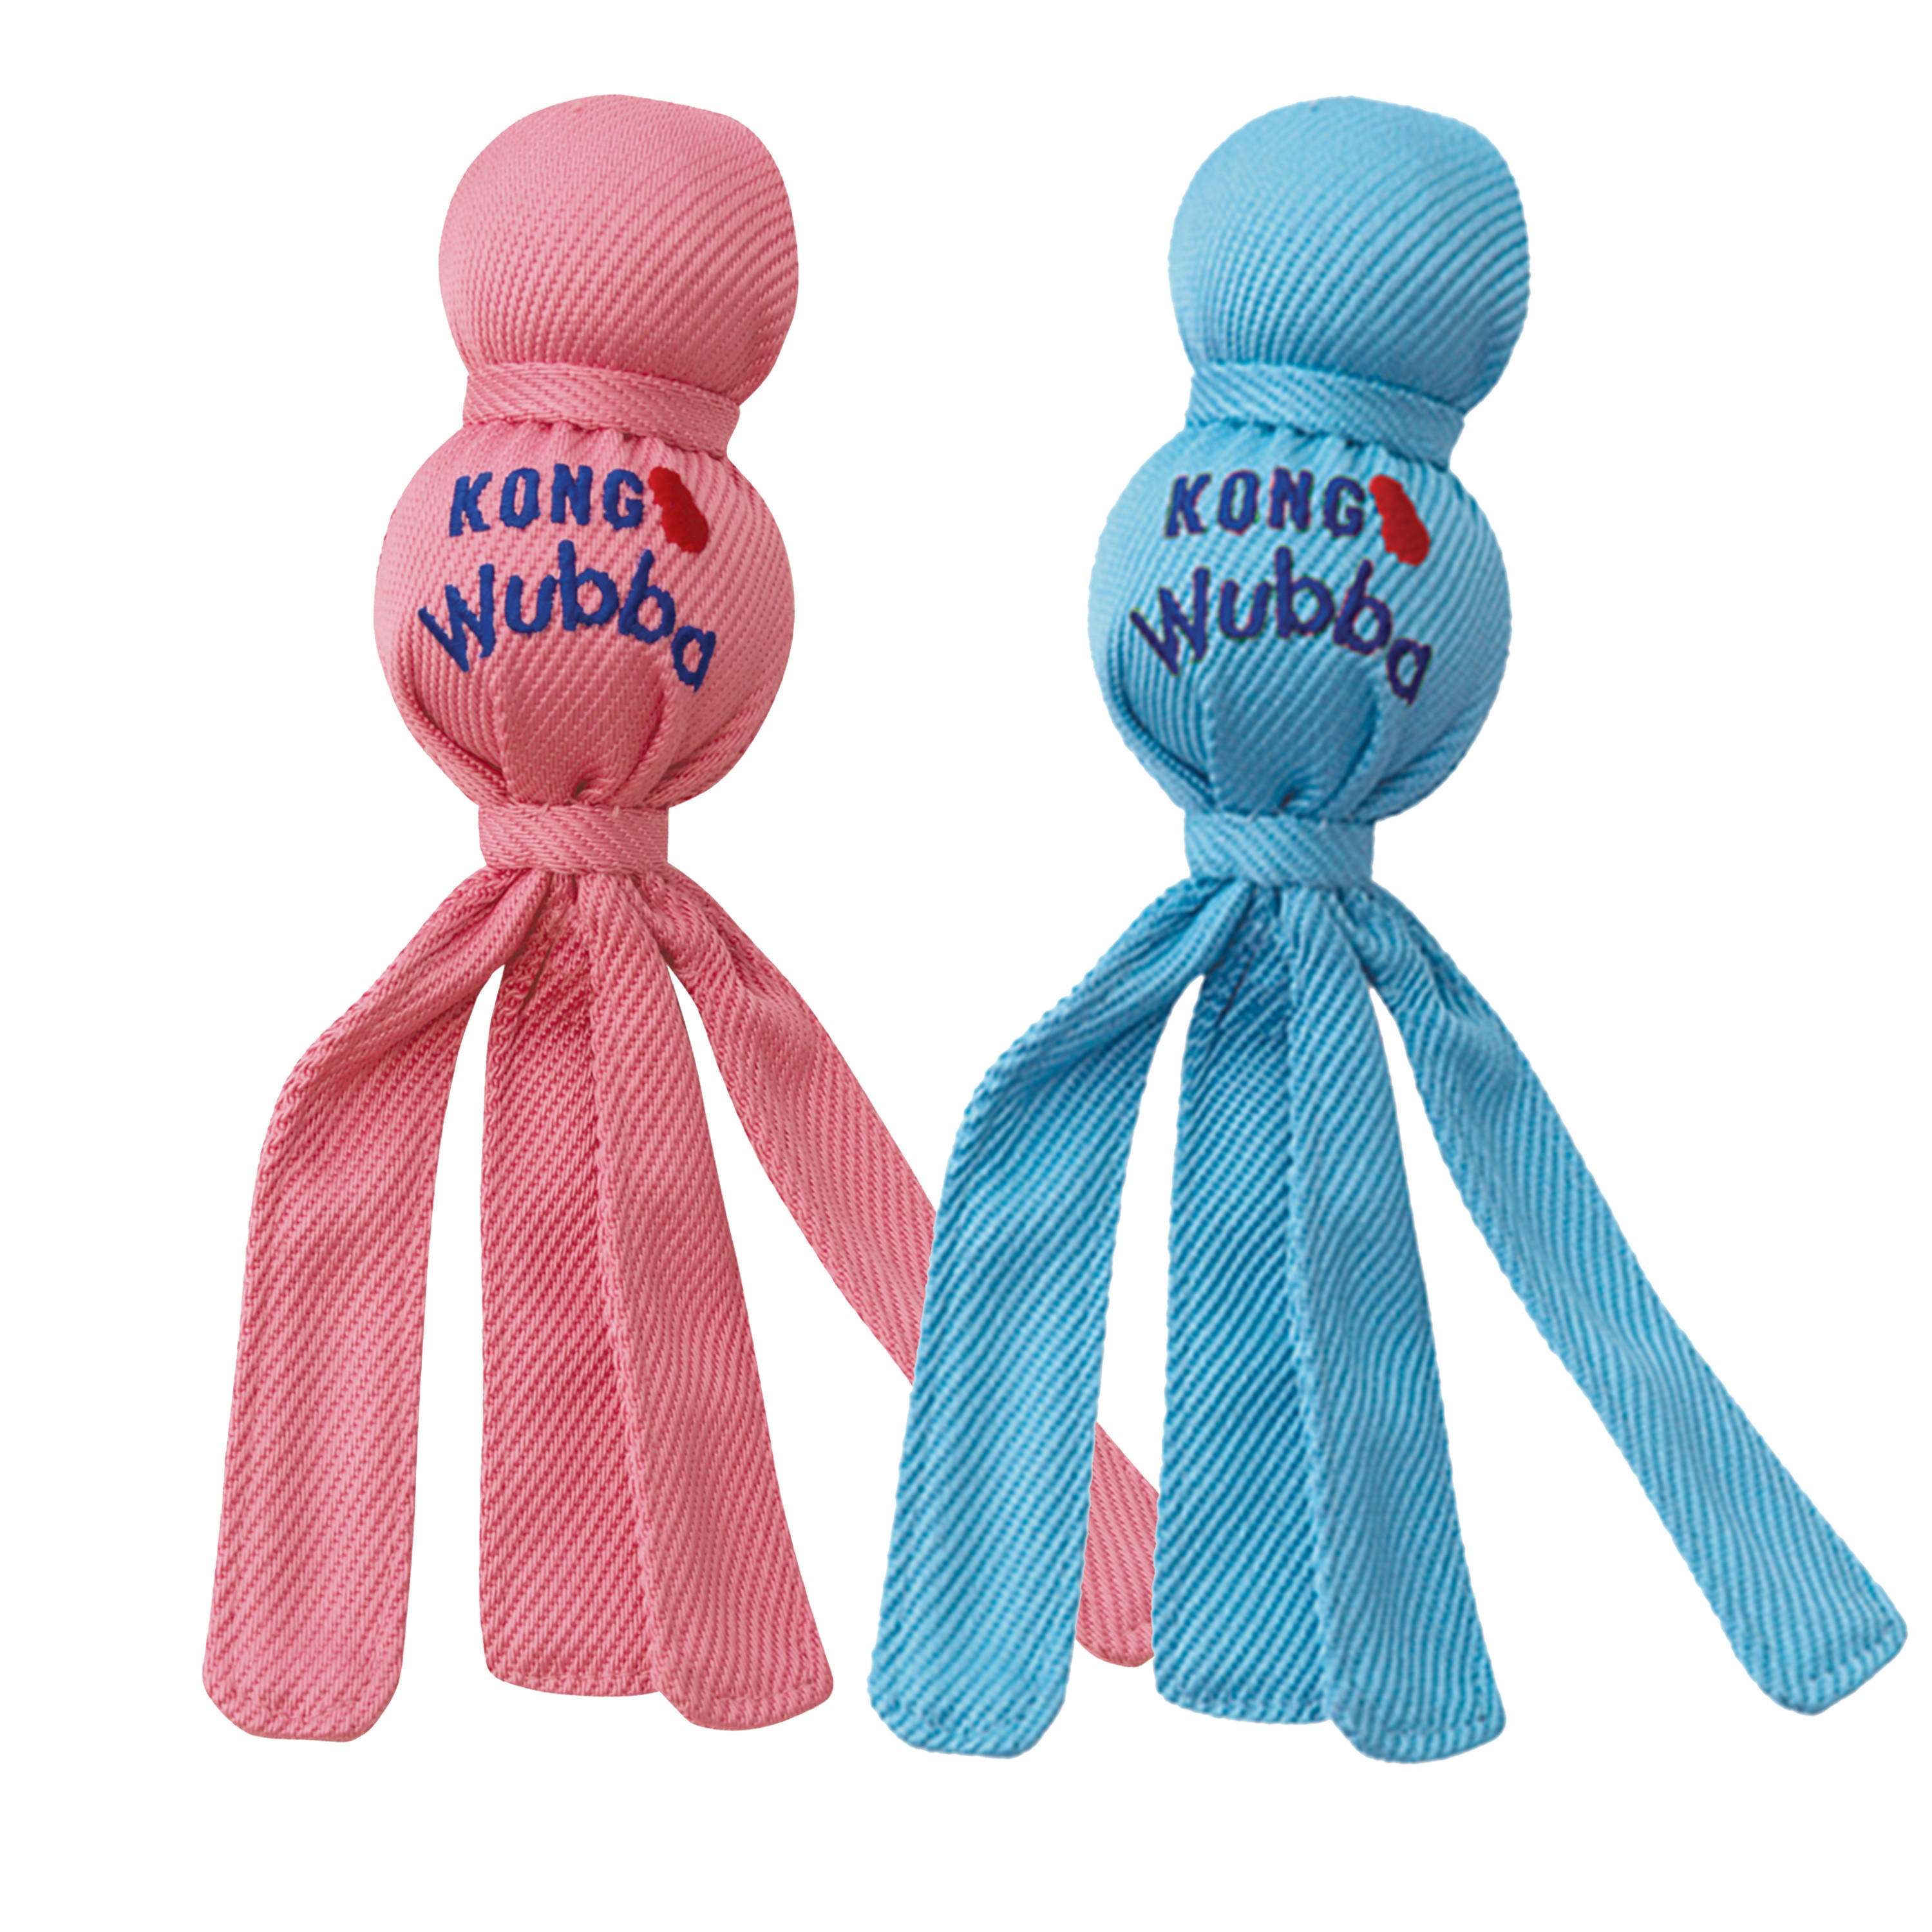 KONG Wubba Puppy Toy Blue and Pink